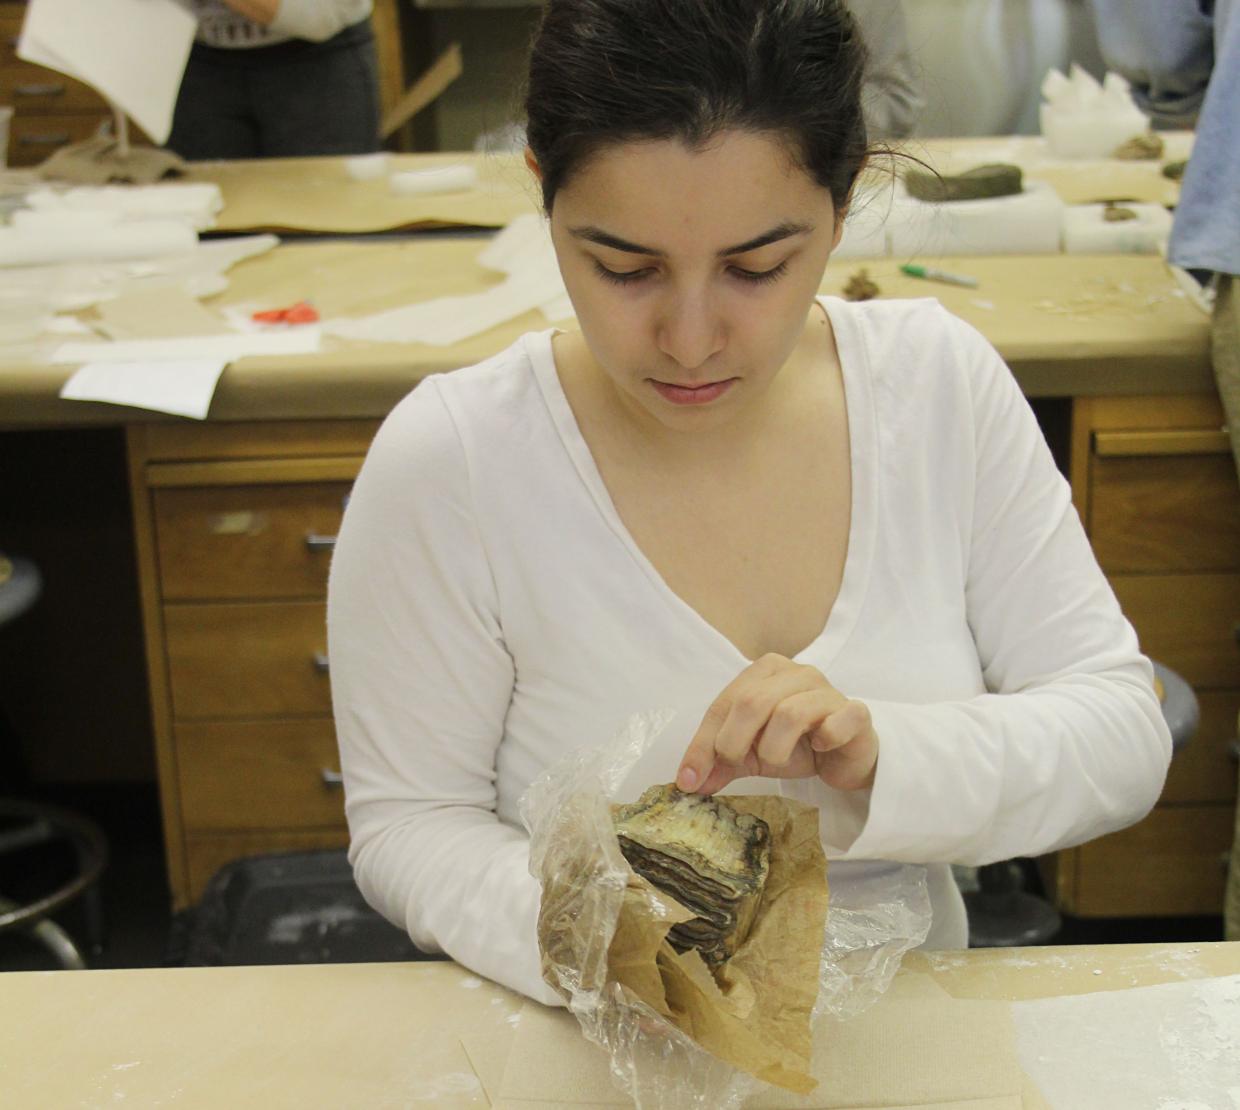 A student examines a fossil in a laboratory setting